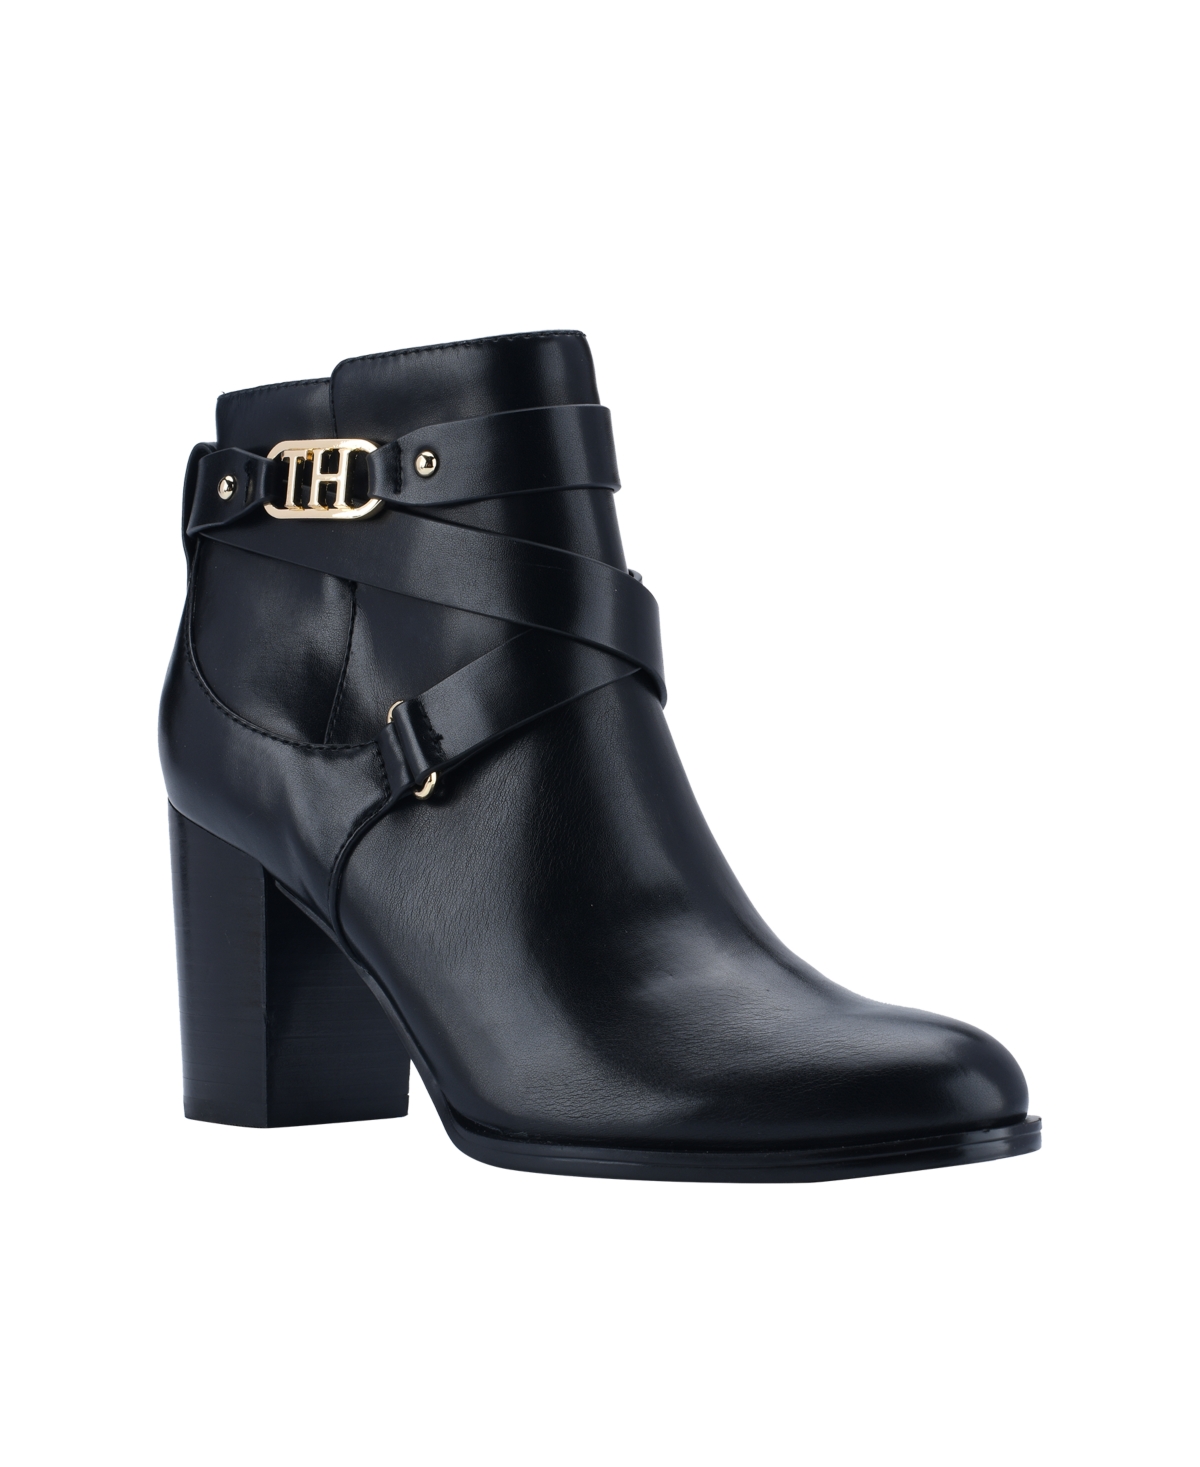 UPC 195972605268 product image for Tommy Hilfiger Women's Darhla Logo Ornamented Heeled Booties Women's Shoes | upcitemdb.com